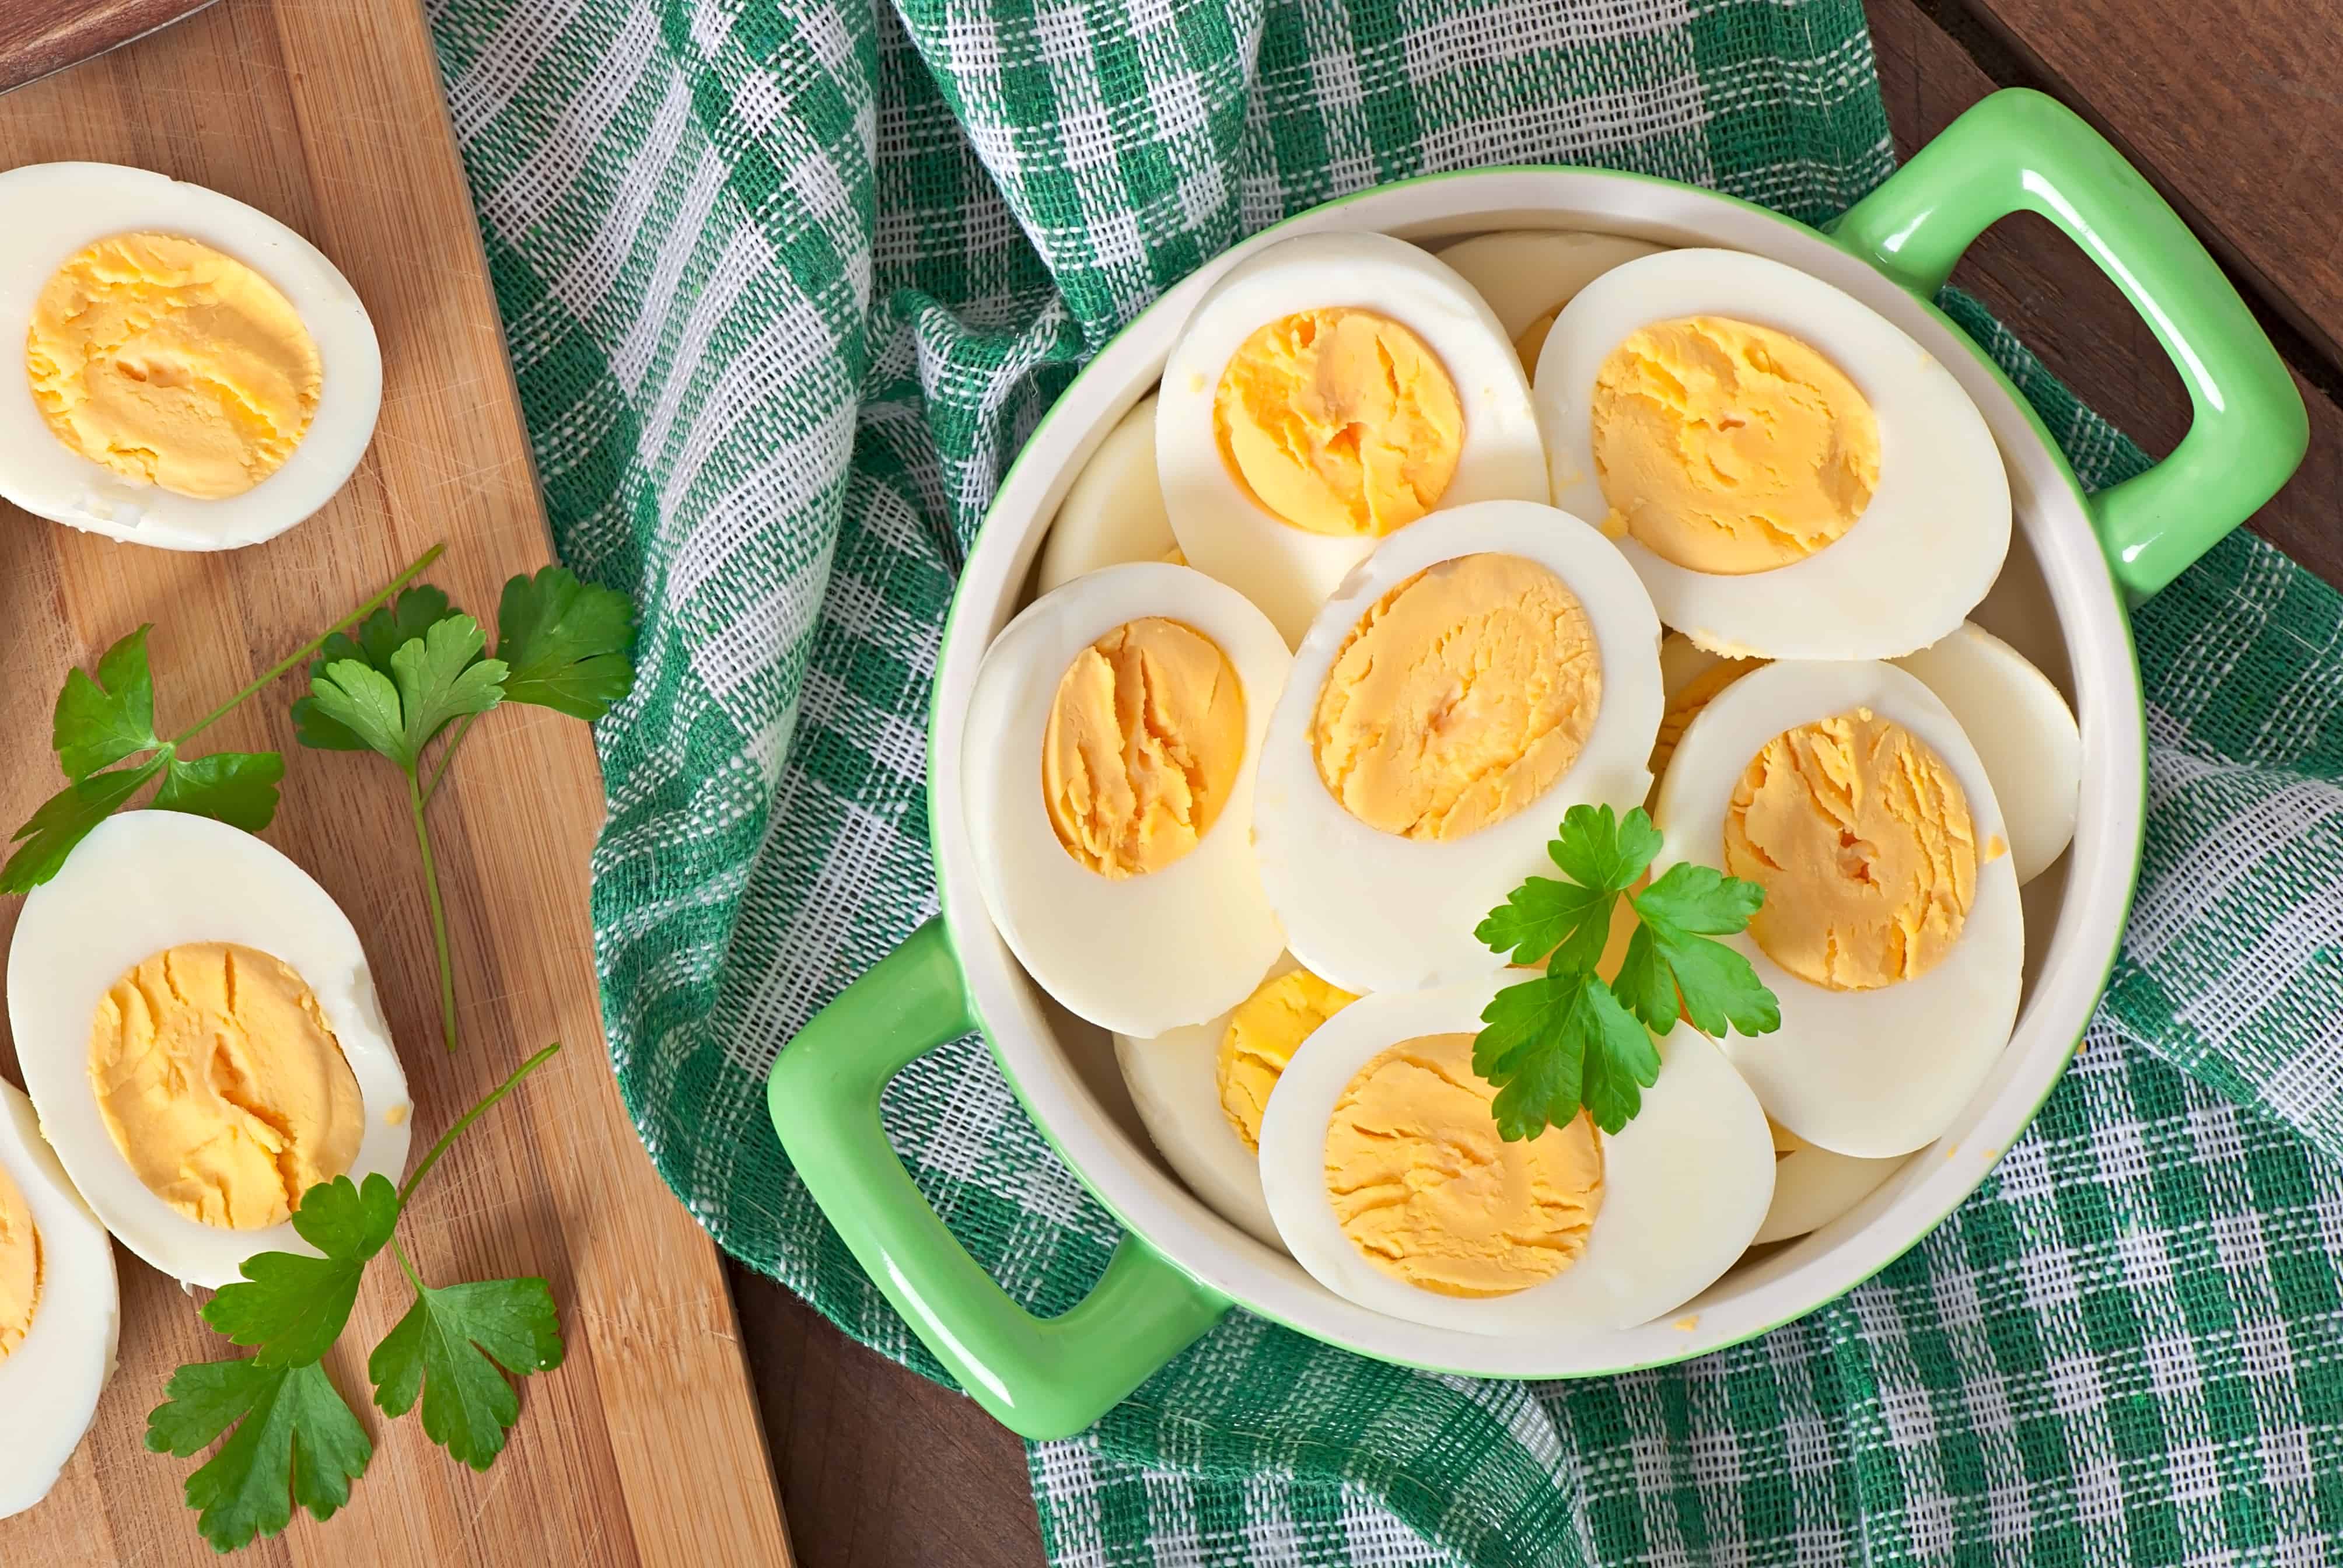 EGGS Eat a balanced and nutritious diet that includes healthy proteins and fats.